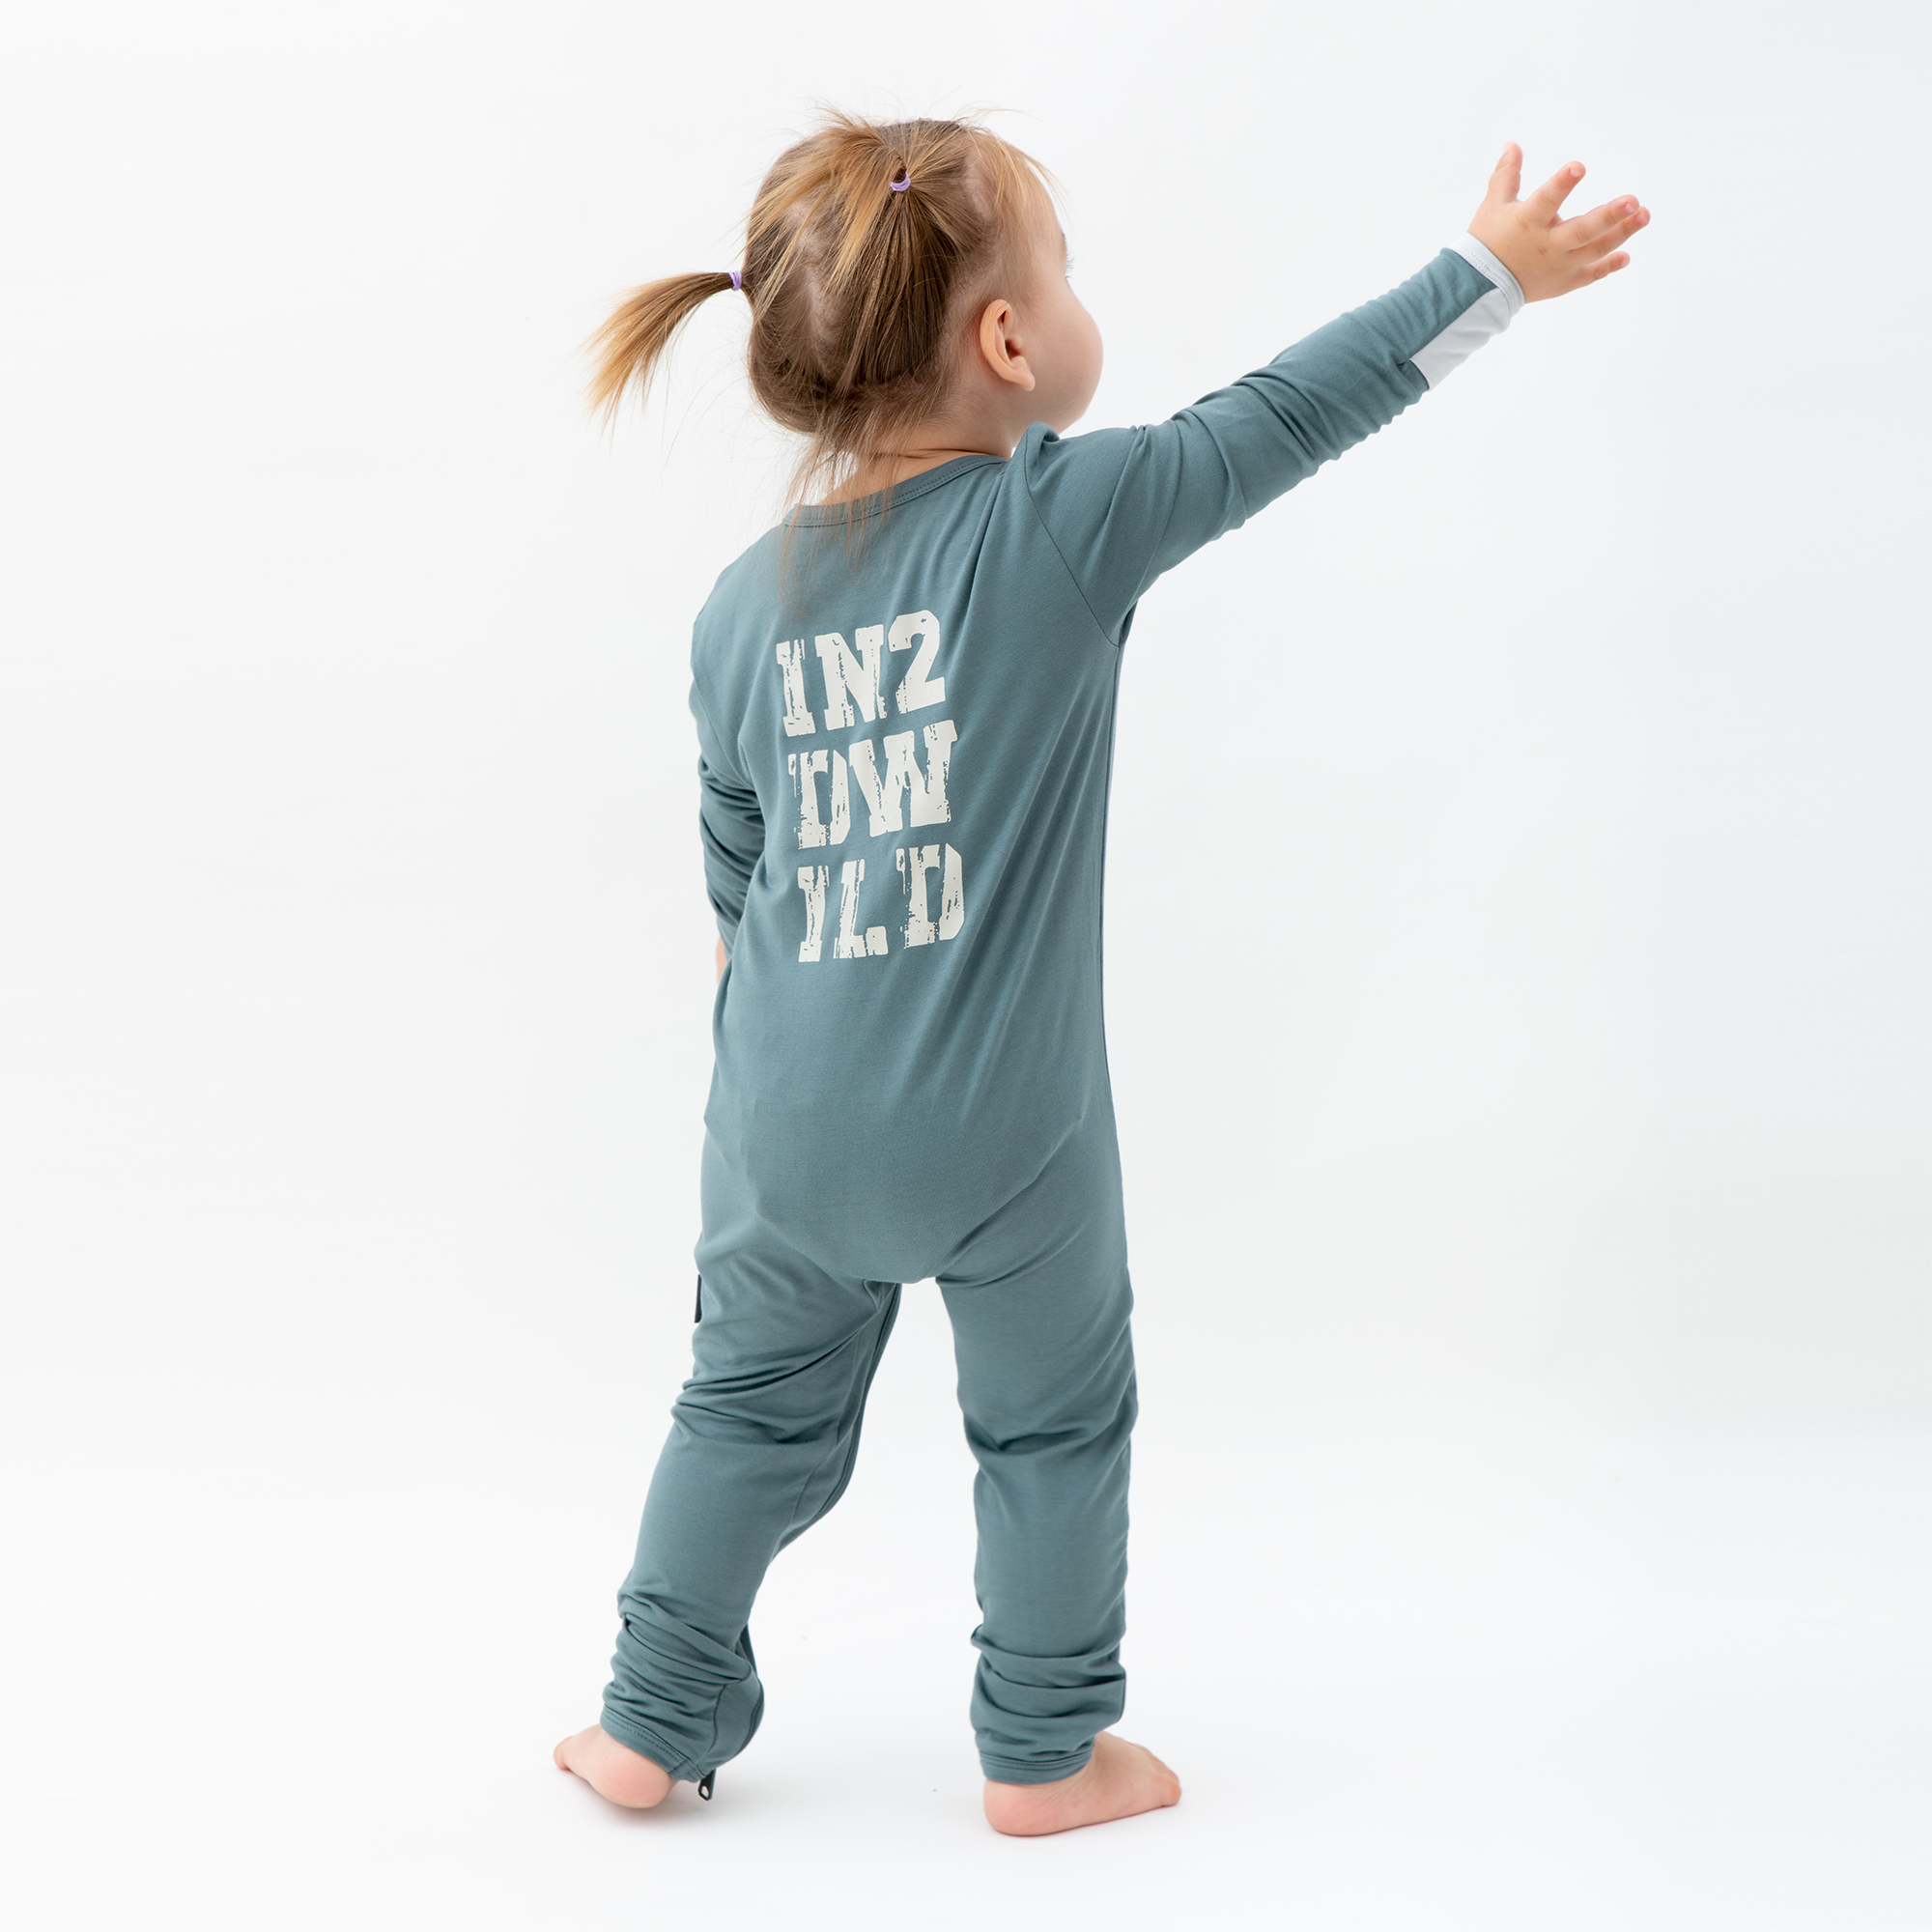 ikkikidz Comfy In2dwild Zippie | Available at The Green Collective